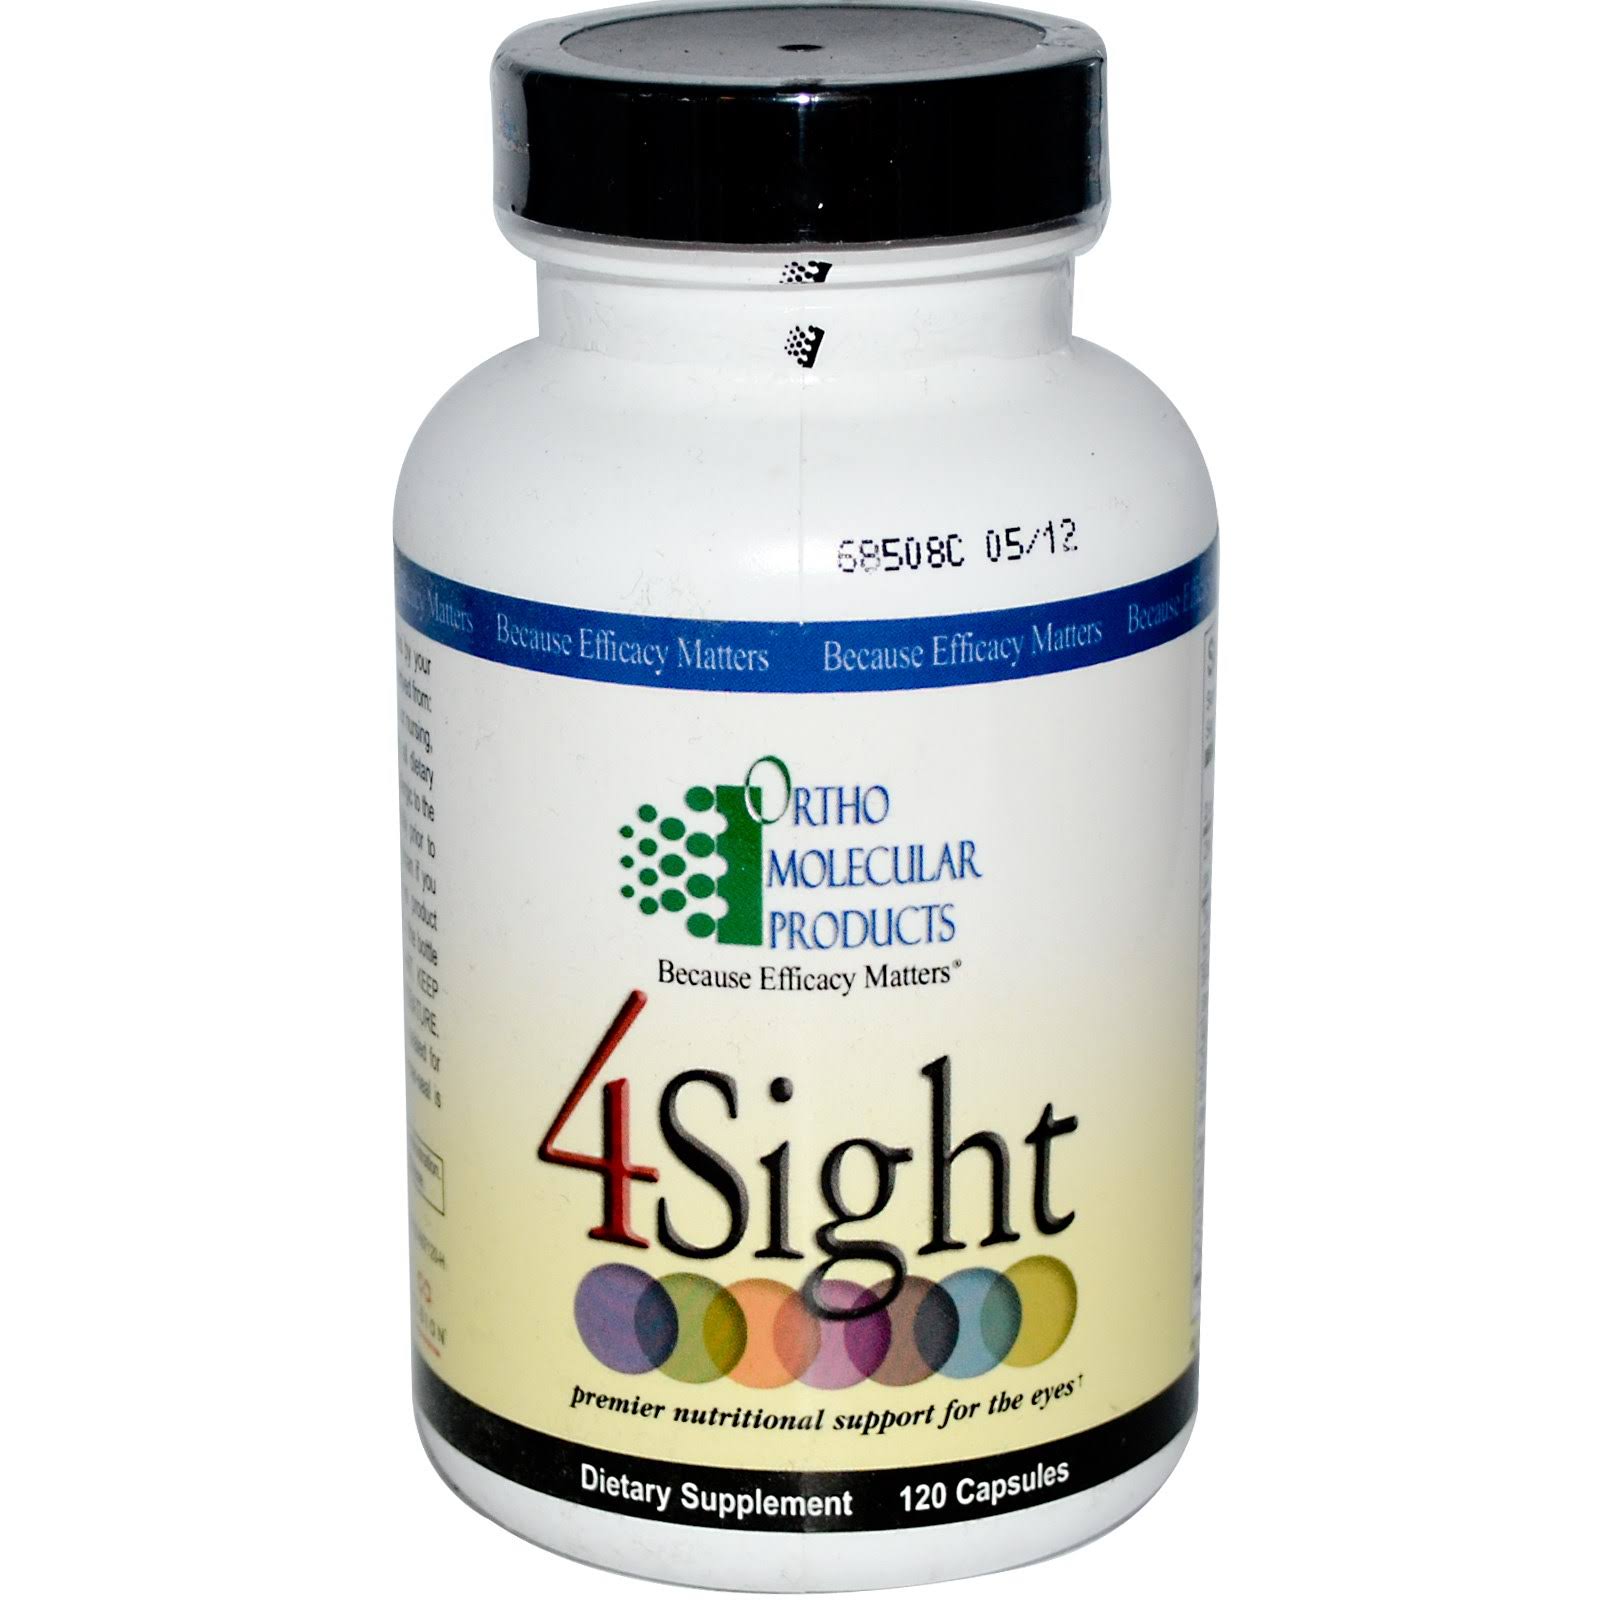 Ortho Molecular Products, 4 Sight, 120 Capsules